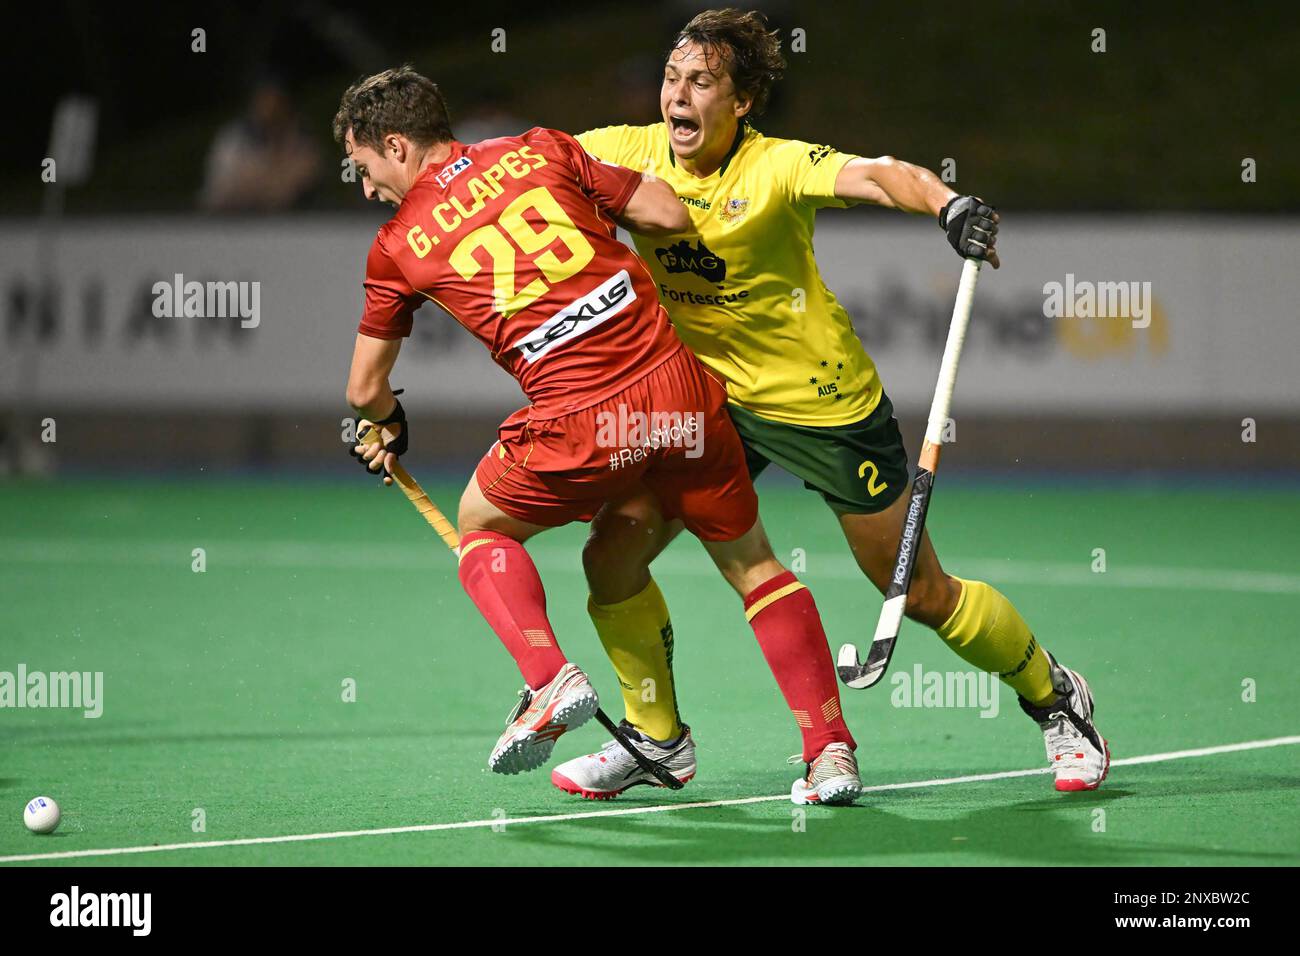 Hobart, Australia. 01st Mar, 2023. Gerard Clapés (L) of Spain Men's National field hockey team and Tom Craig (R) of Australia National Men's field hockey team in action during the 2022/23 International Hockey Federation (FIH) Men's Pro-League match between Australia and Spain held at the Tasmanian Hockey Centre in Hobart. Final score Spain 4:2 Australia. (Photo by Luis Veniegra/SOPA Images/Sipa USA) Credit: Sipa USA/Alamy Live News Stock Photo